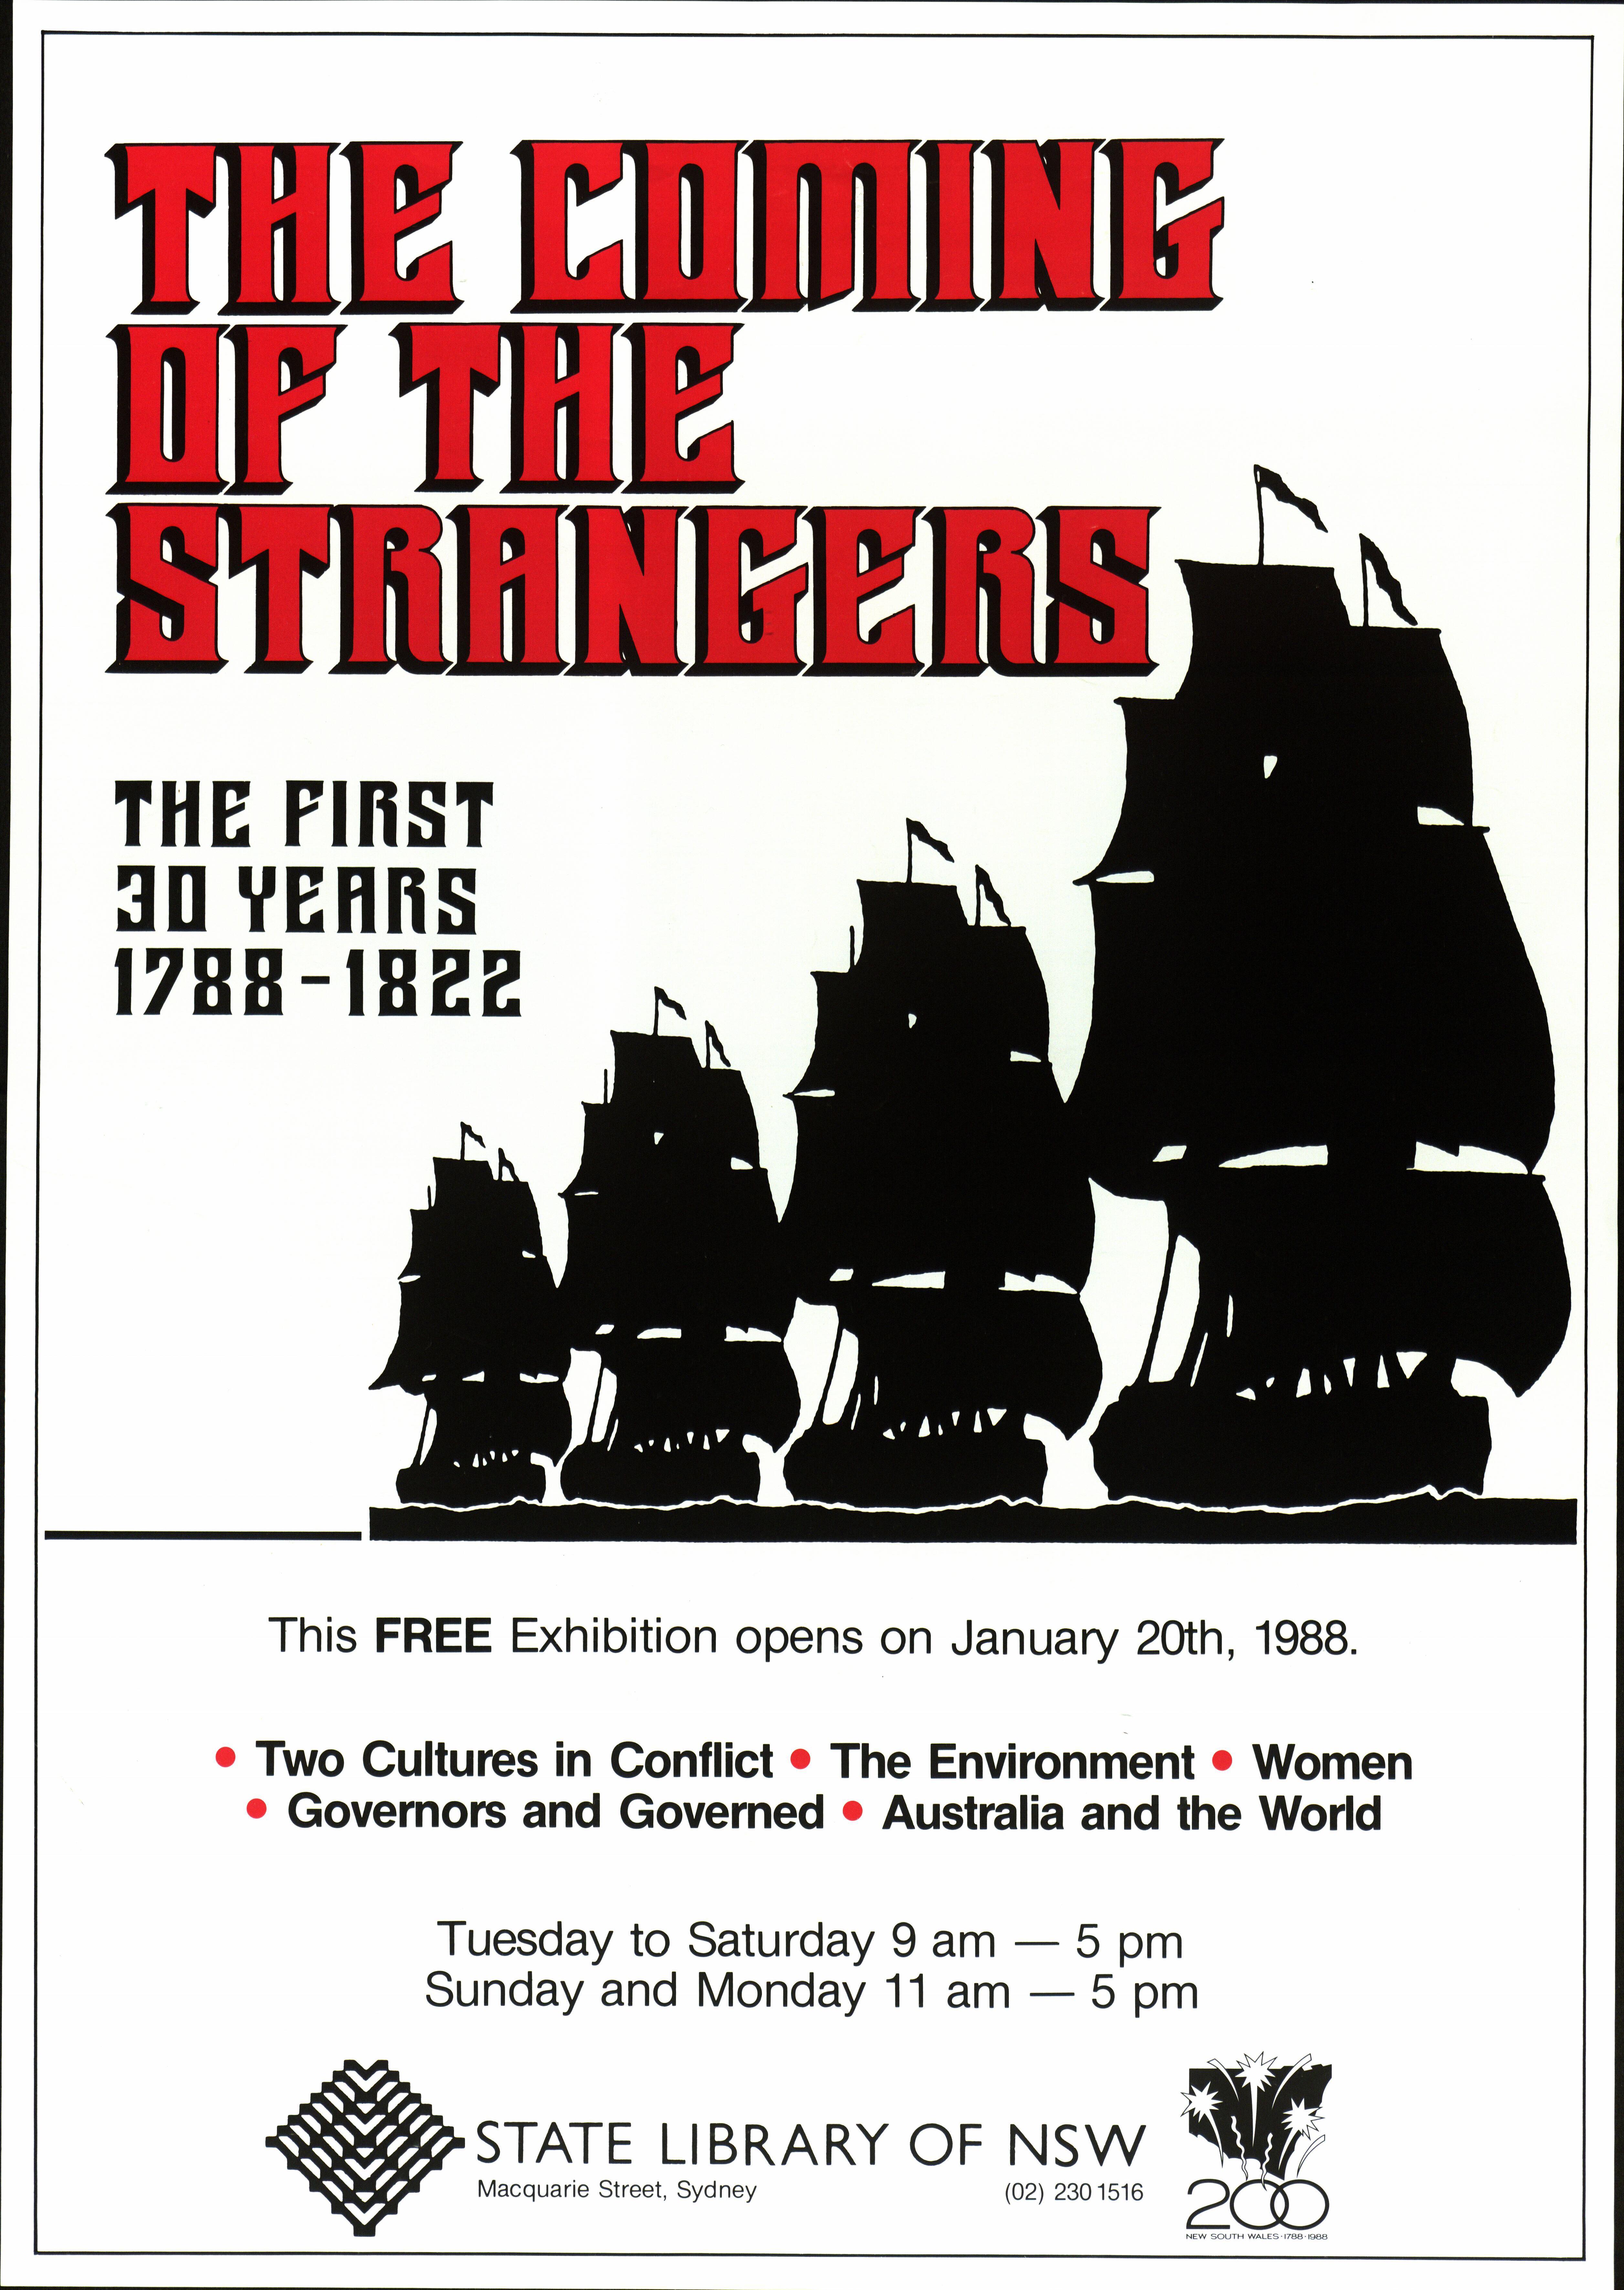 The coming of the strangers : The first 30 years, 1788-1822. (Exhibition Poster)